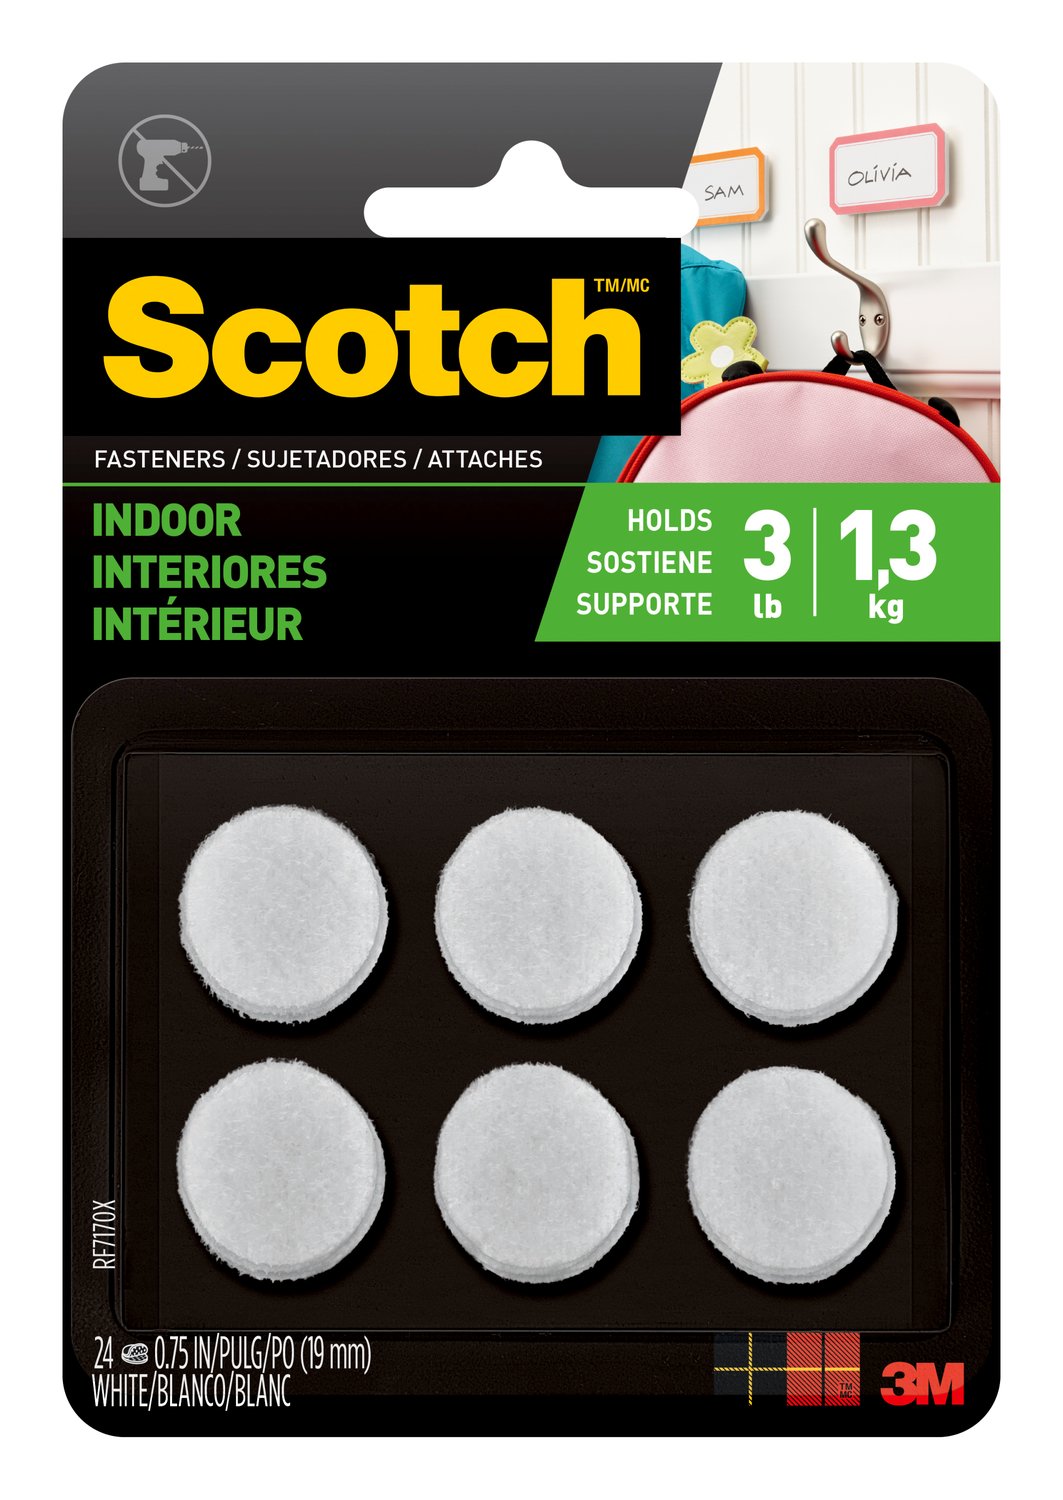 https://www.e-aircraftsupply.com/ItemImages/22/1227179E_scotch-rf7170x-indoor-fasteners.jpg